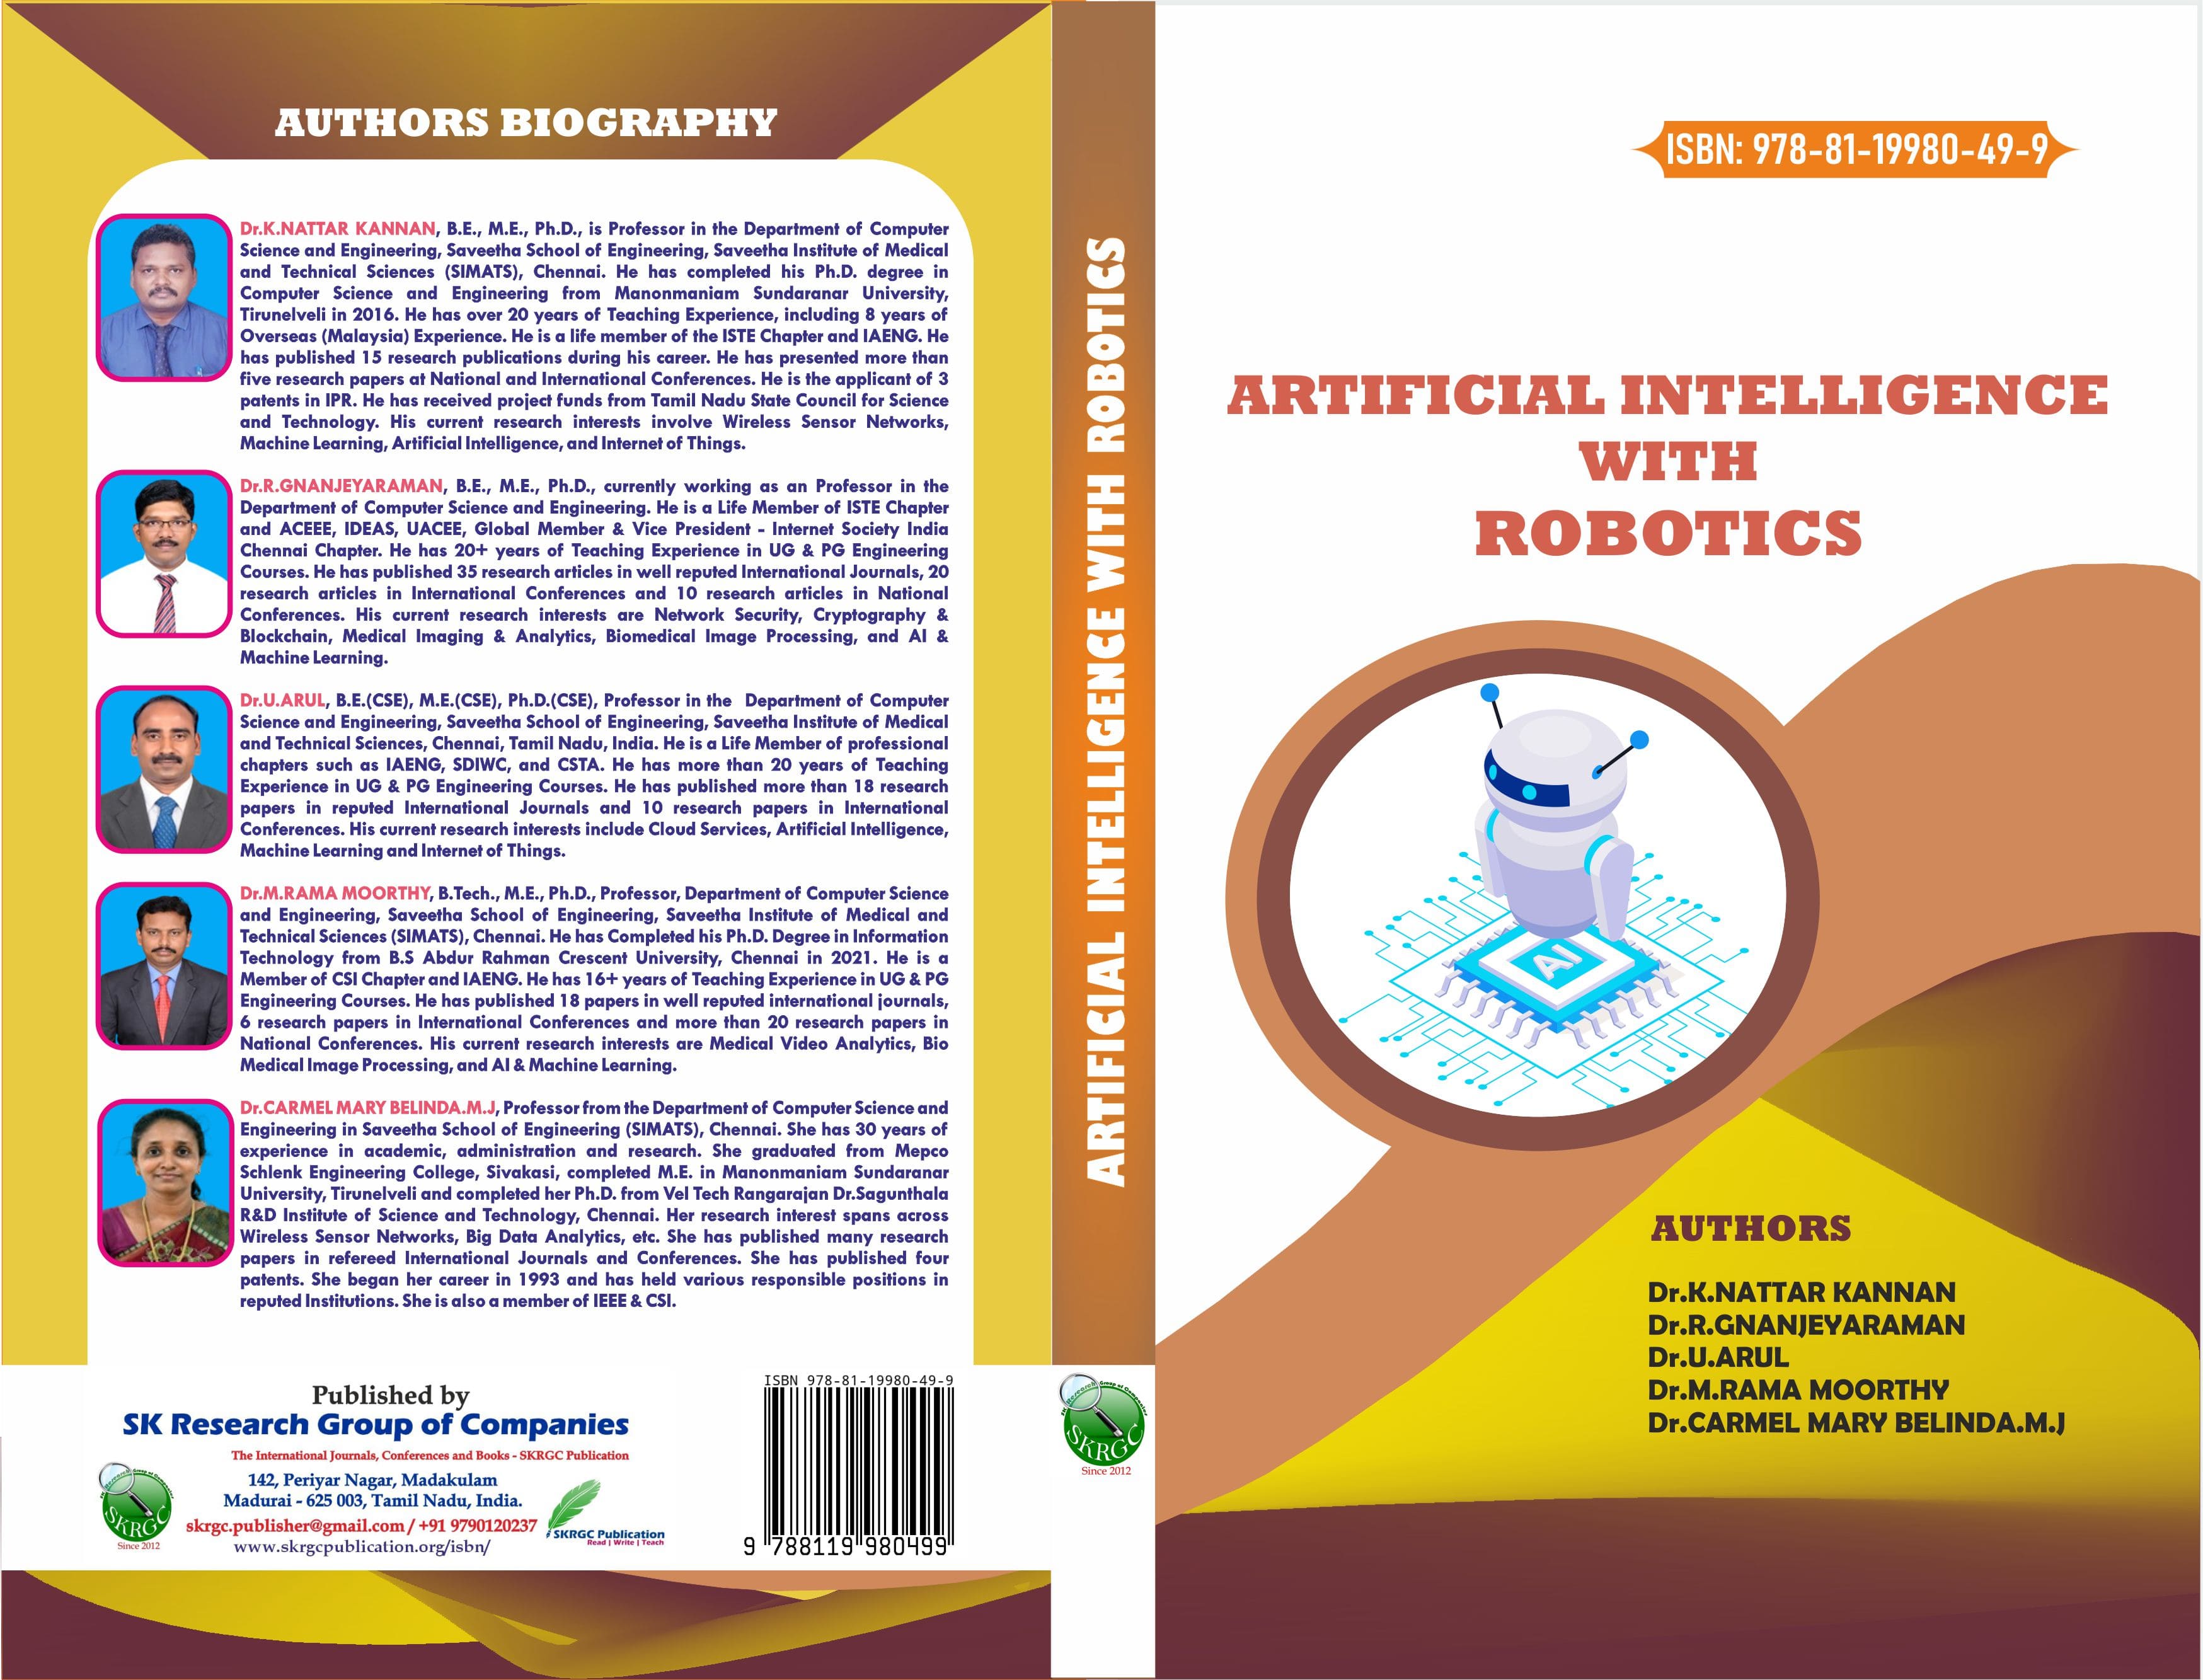 ARTIFICIAL INTELLIGENCE WITH ROBOTICS